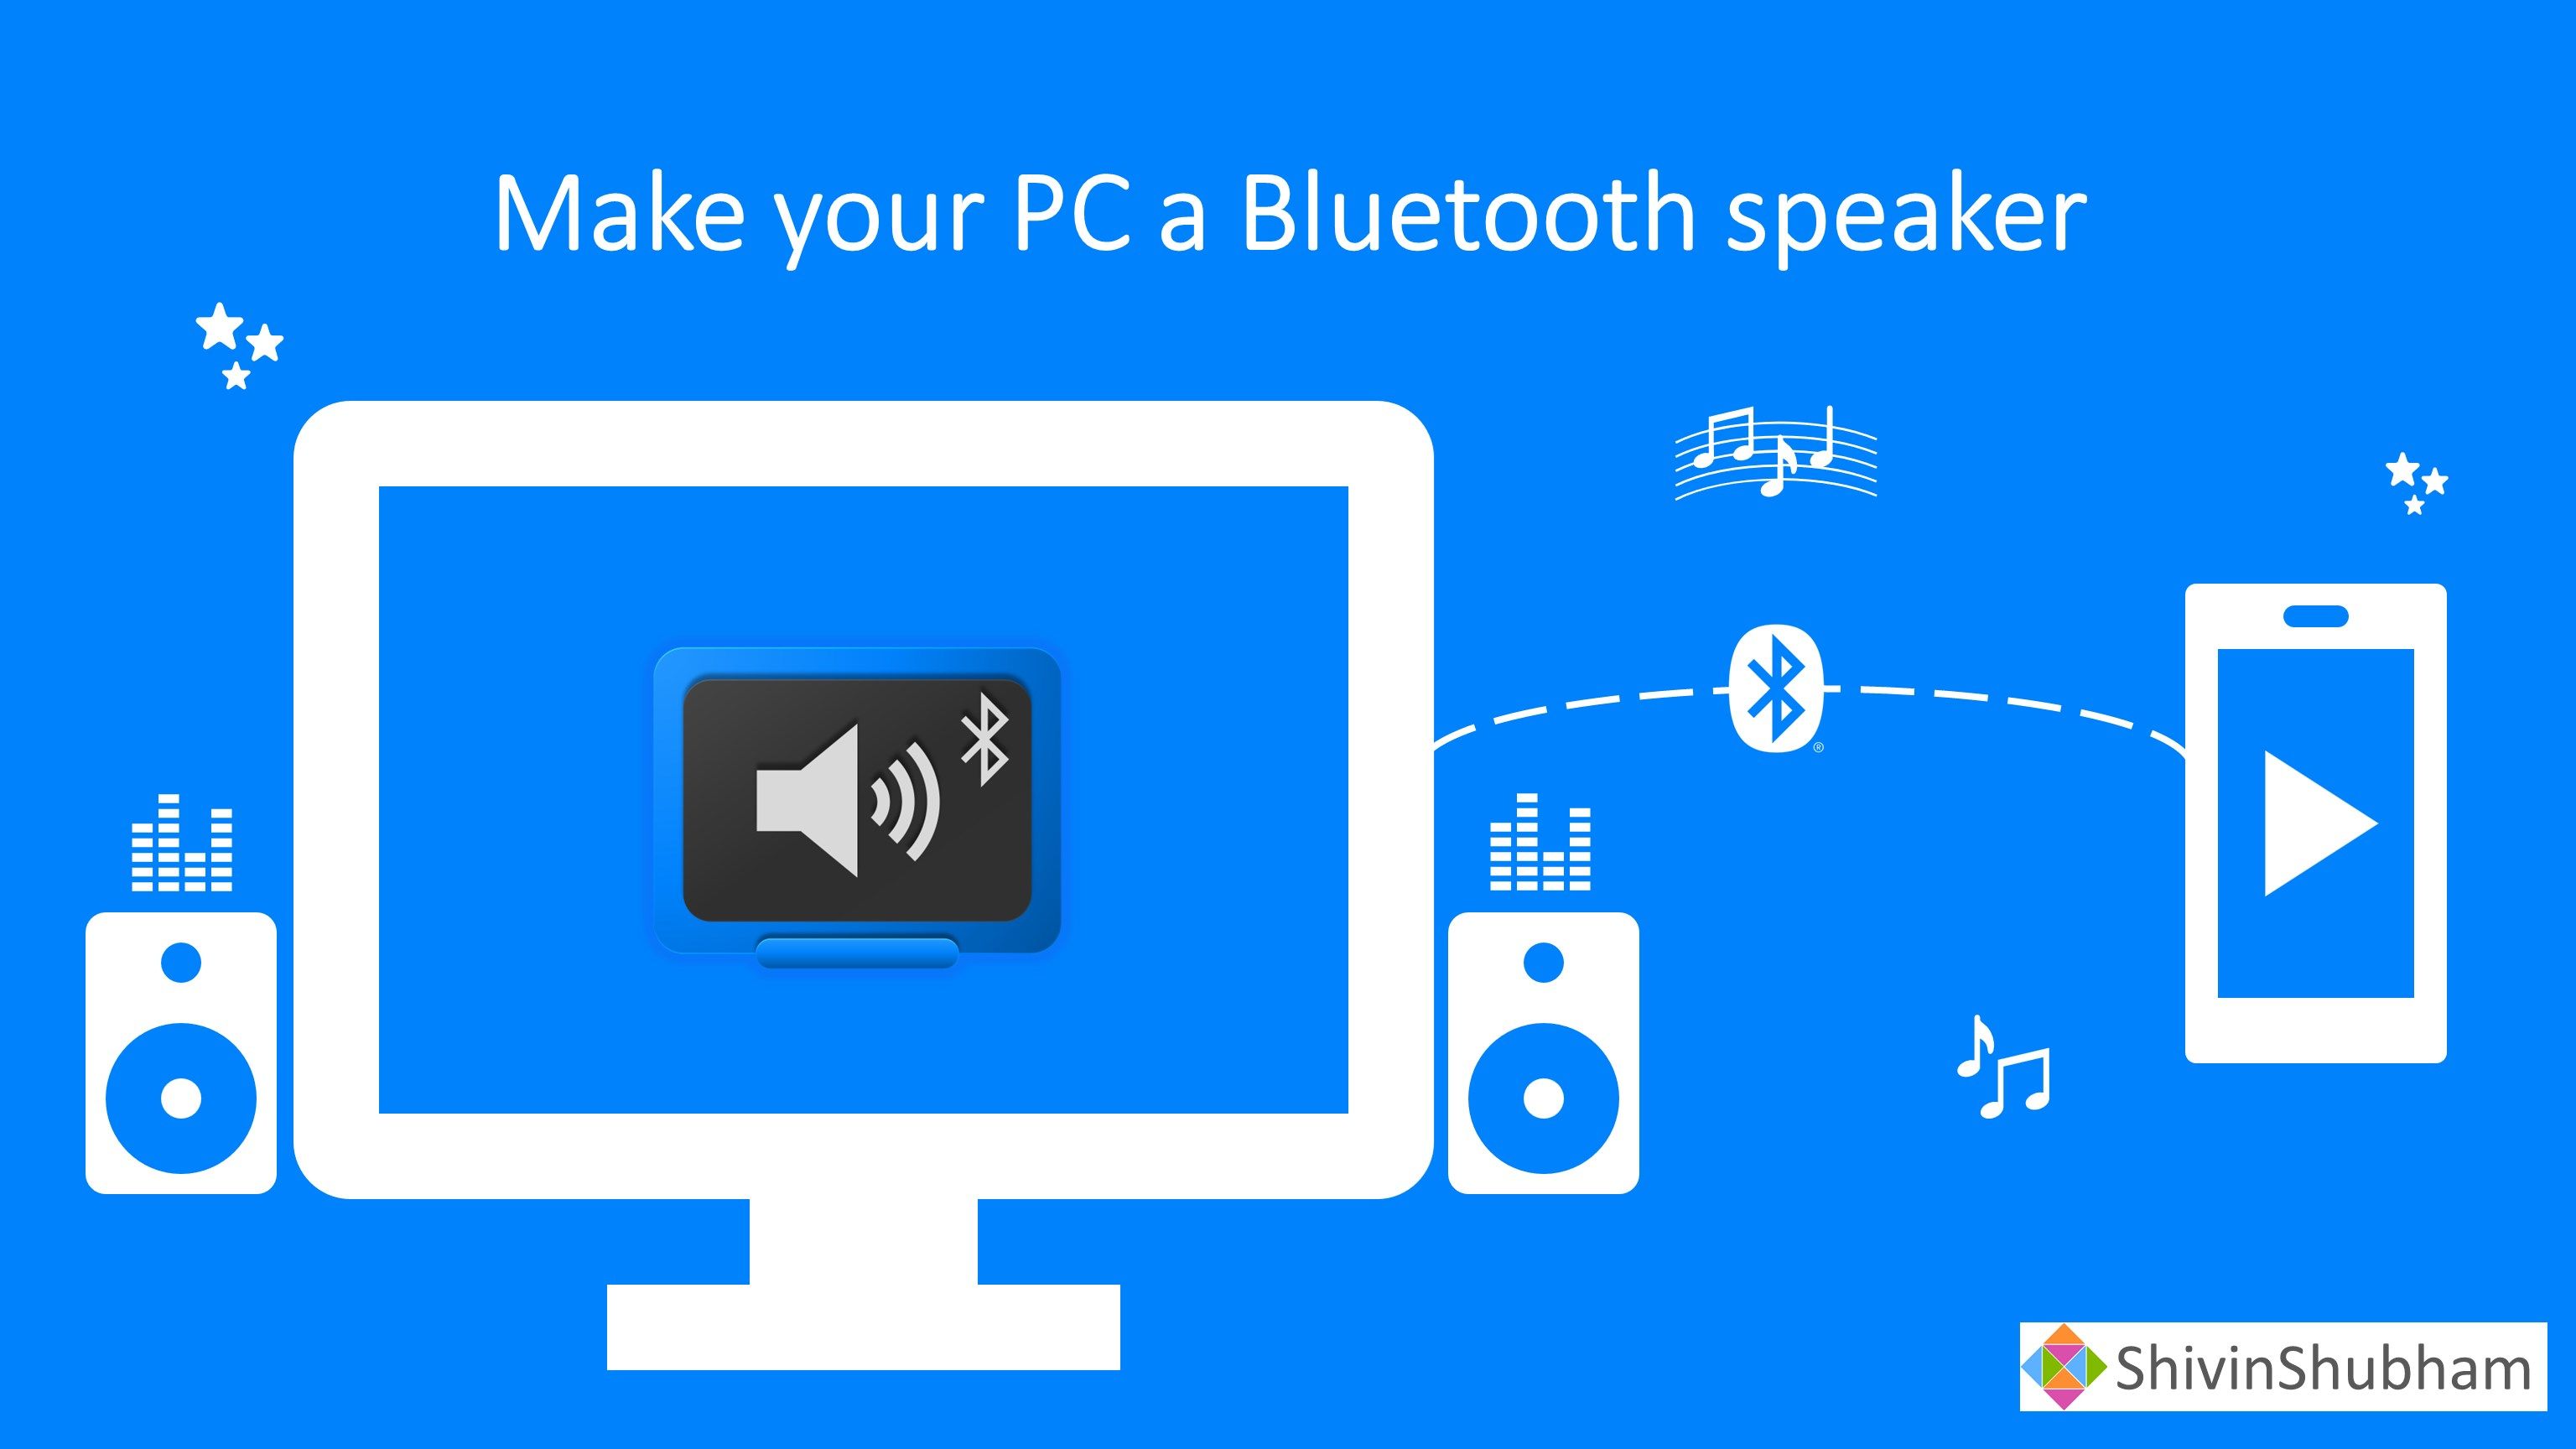 Make your PC a Bluetooth speaker